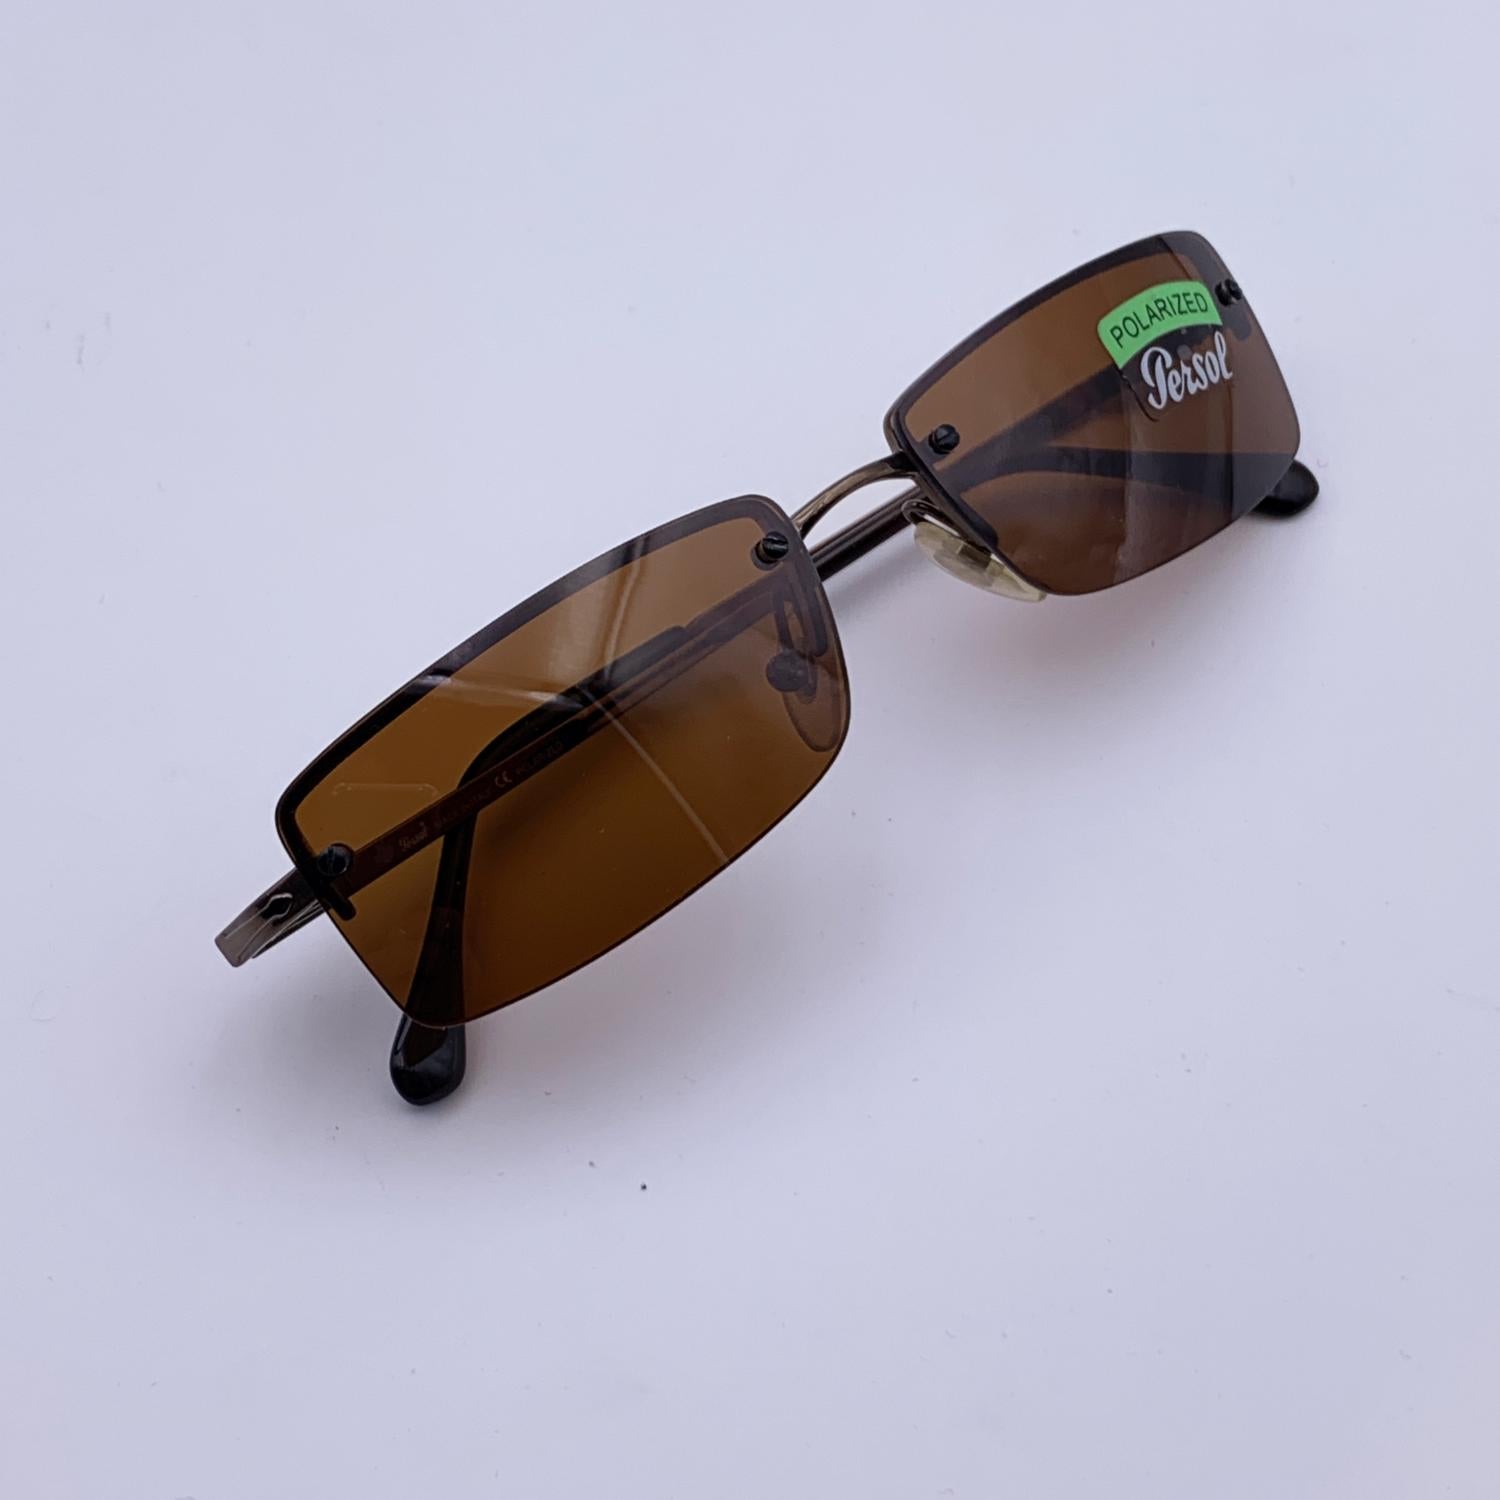 Legendary PERSOL RATTI Vintage Rectangle rimless Sunglasses - Mod. 2193-S - 135 - 55/15 - 618/83. Brown original polarized Persol lenses- 100% UV protection- Flexible temple. Made in Italy

Details

MATERIAL: Metal

COLOR: Brown

MODEL: